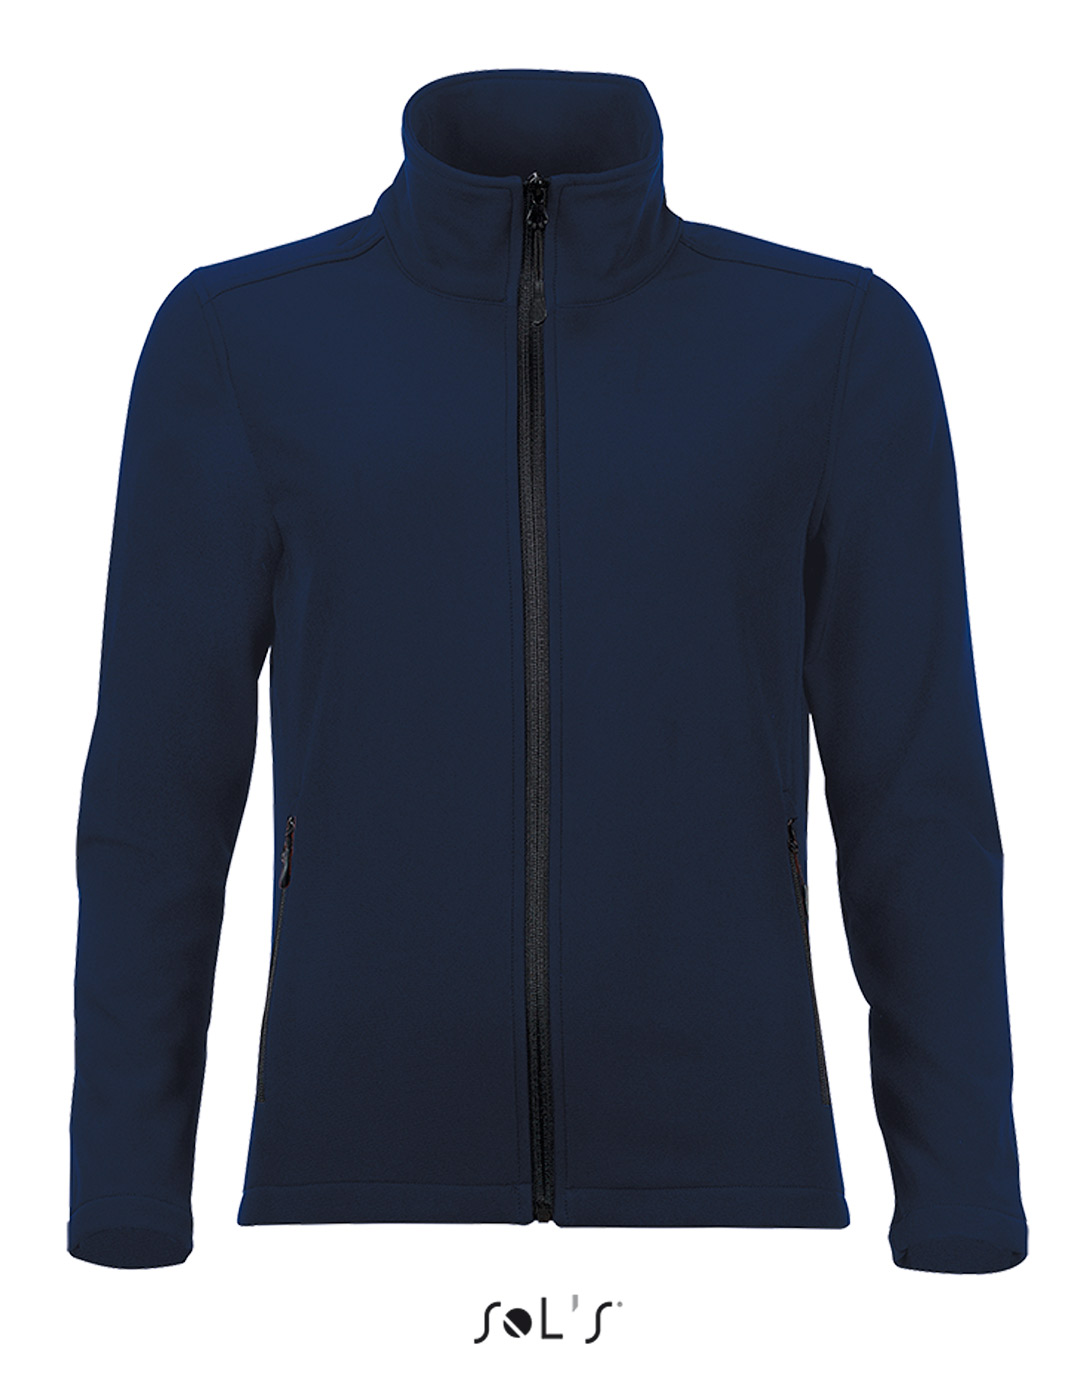 Race women 01194 french navy a